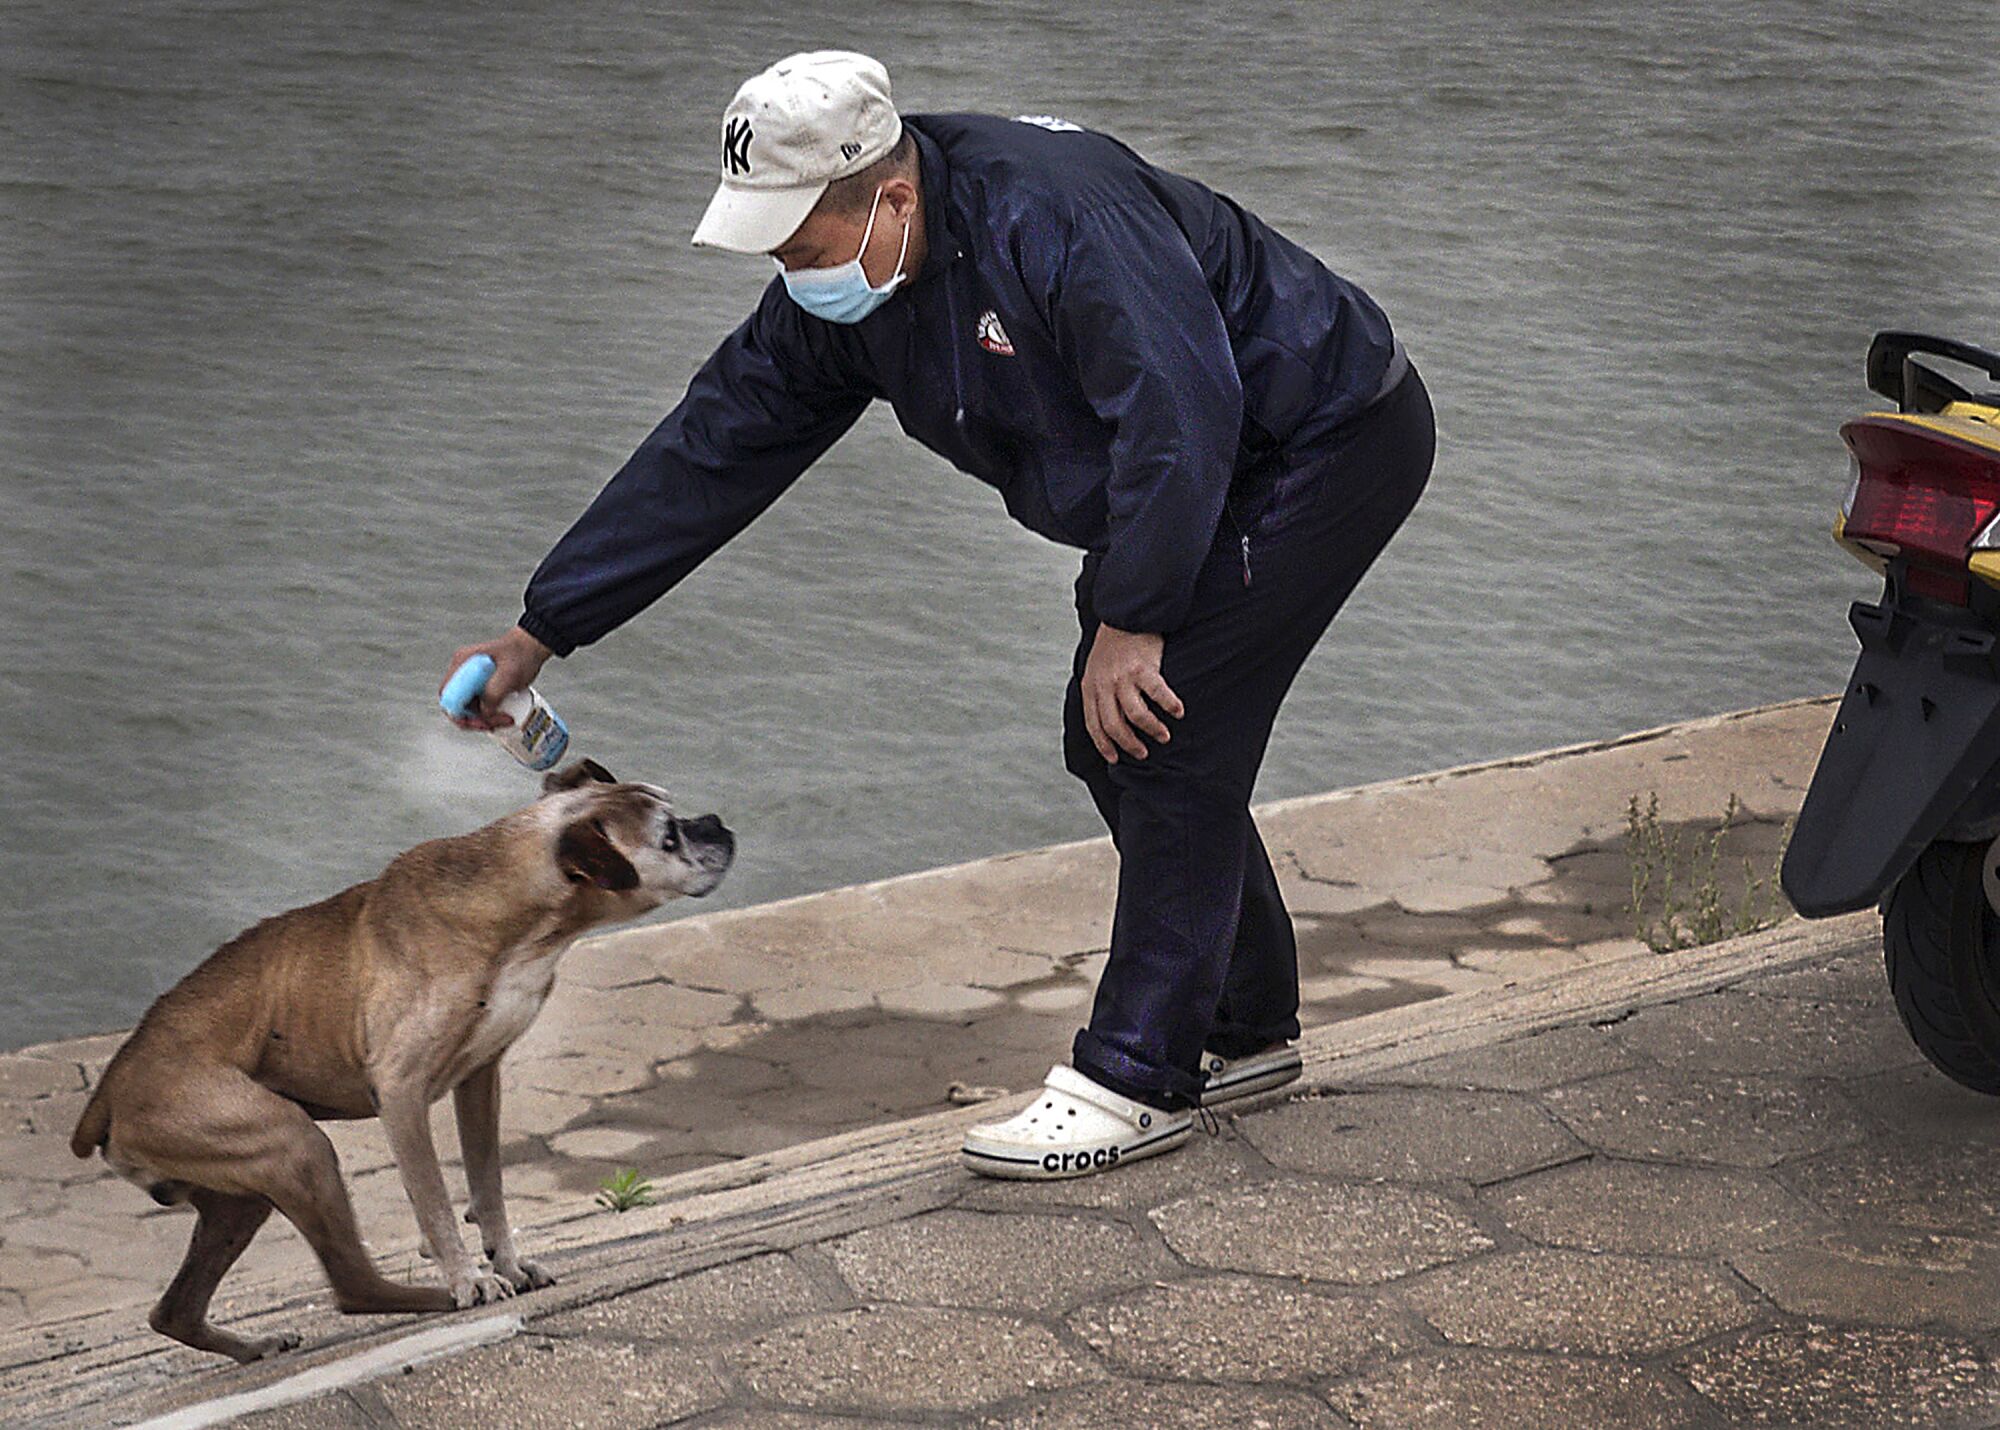 CHINA: An owner squirted his dog with alcohol nearby Yangtze river on April 17, 2020 in Wuhan, Hubei Province, China.the government started lifting outbound travel restrictions on April 8 from Wednesday after almost 11 weeks of lockdown to stem the spread of COVID-19.